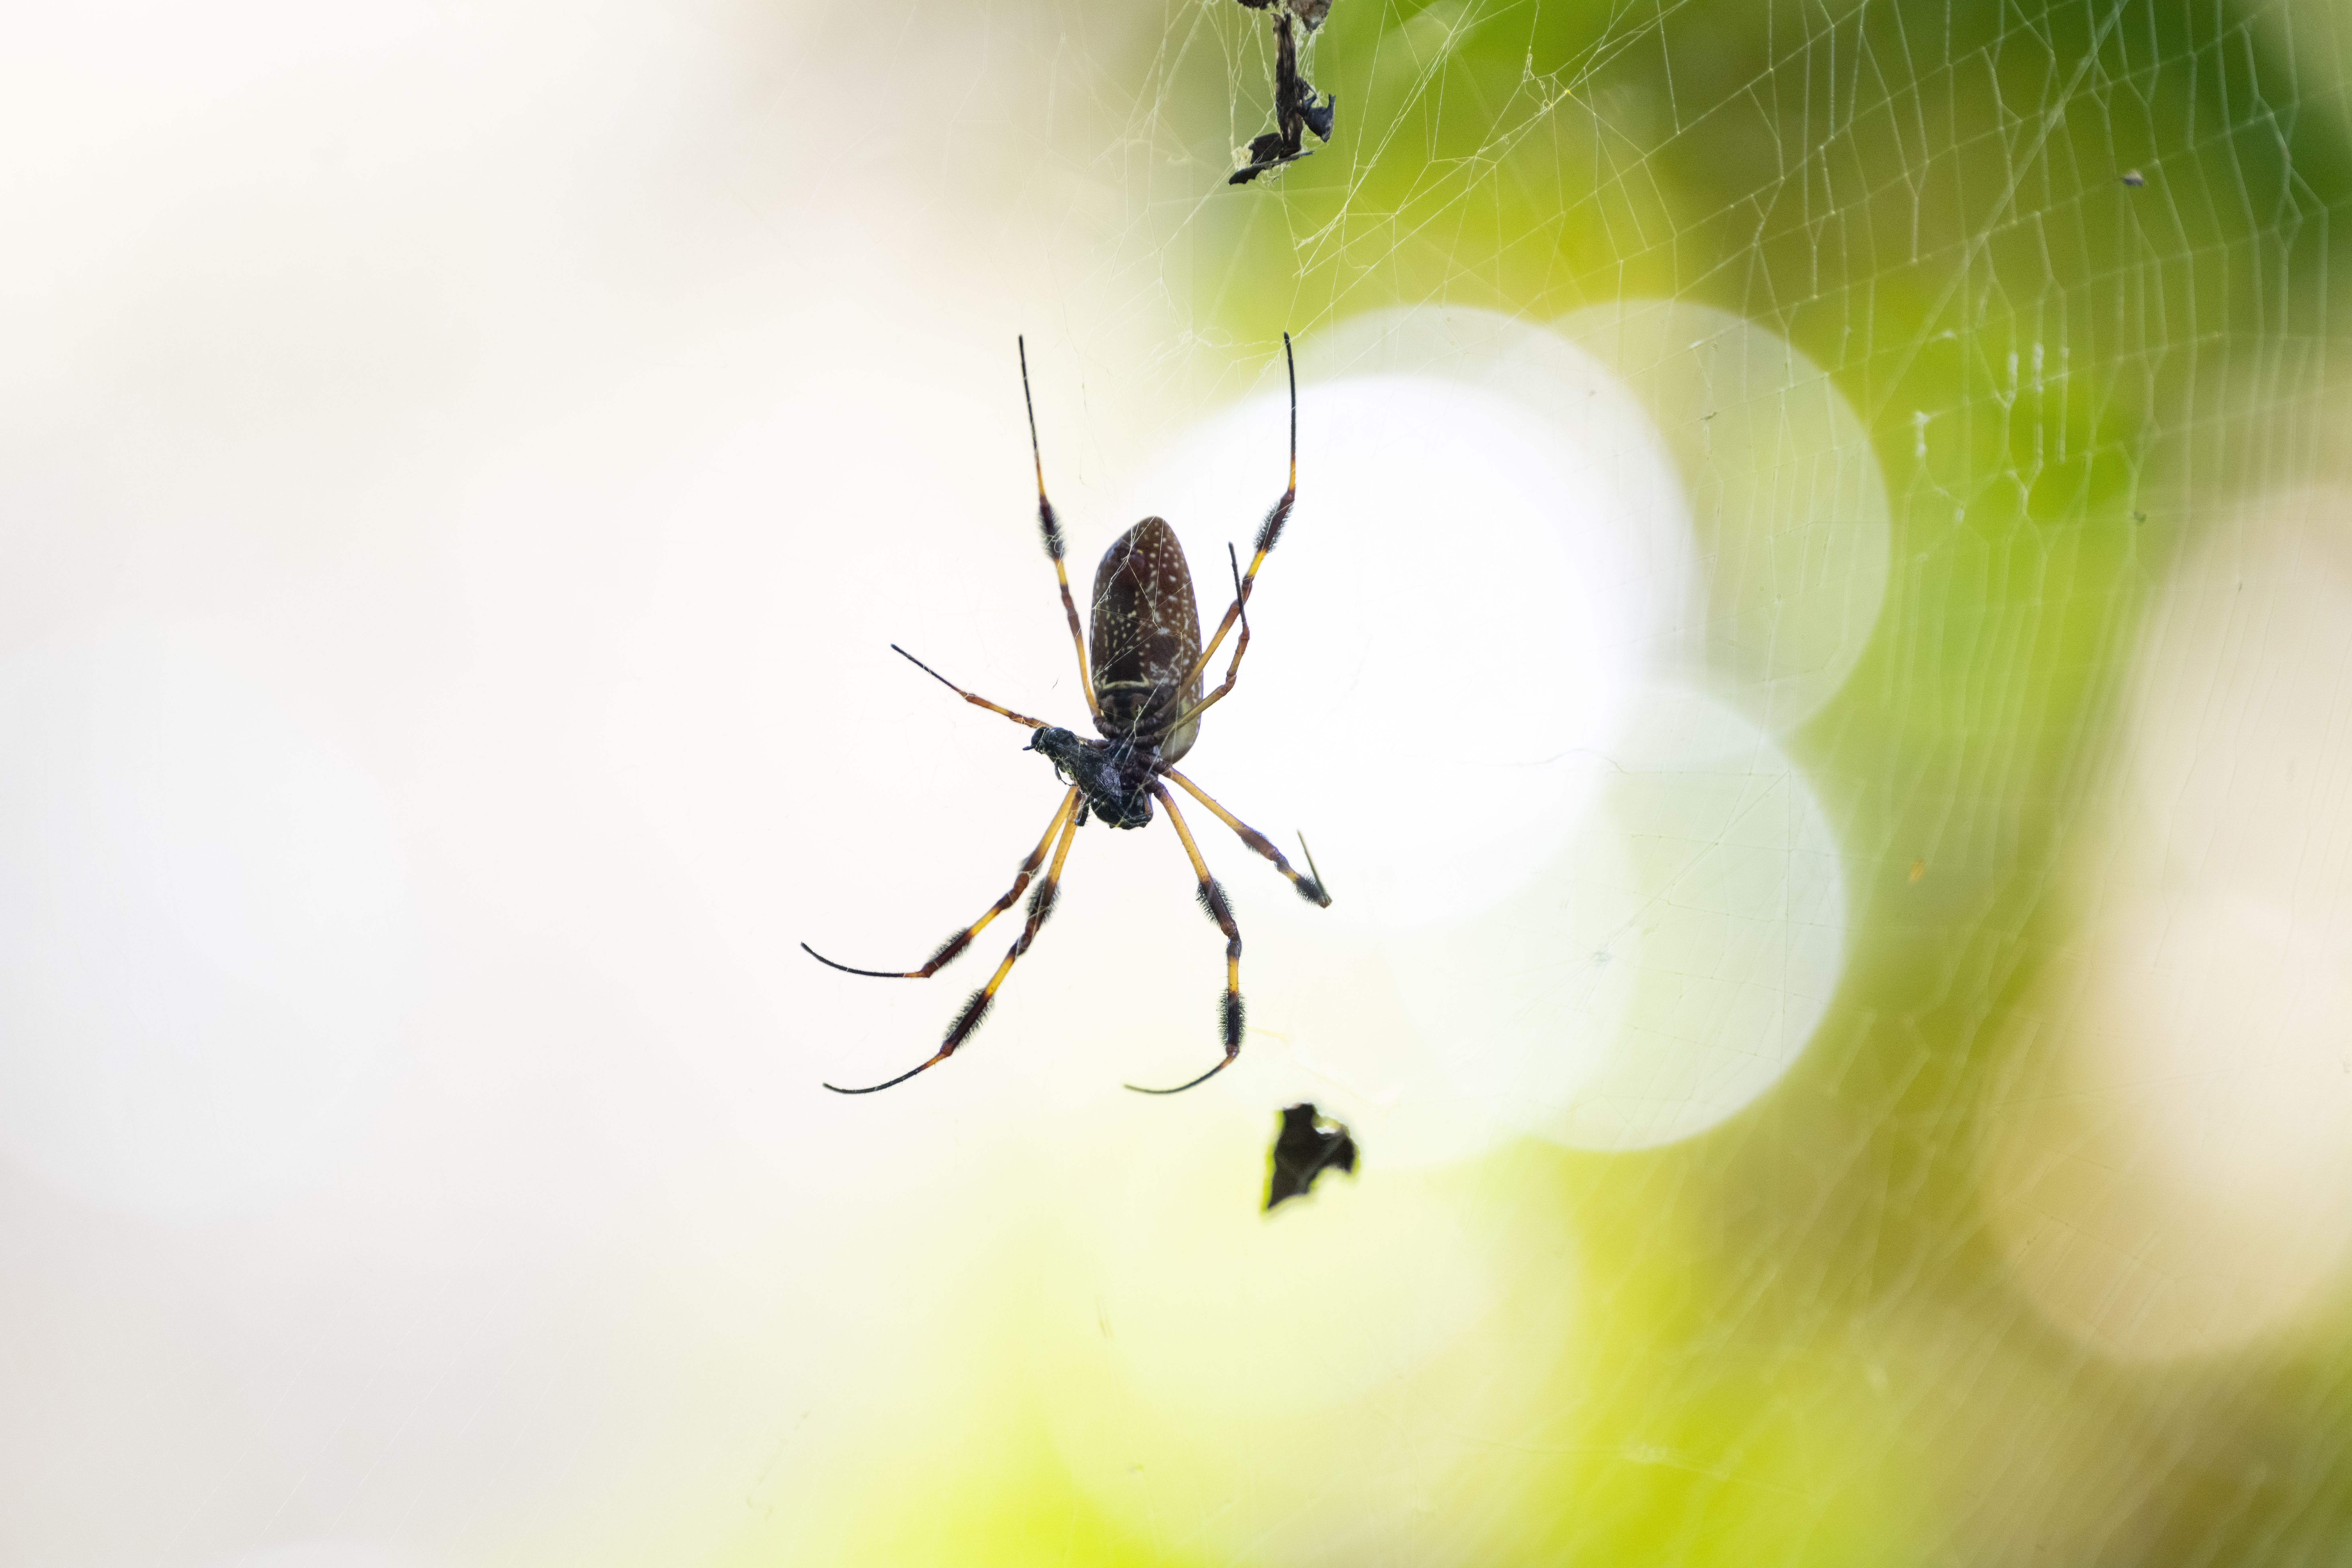 arachnid-is-poised-on-its-web-using-the-strands-t-min